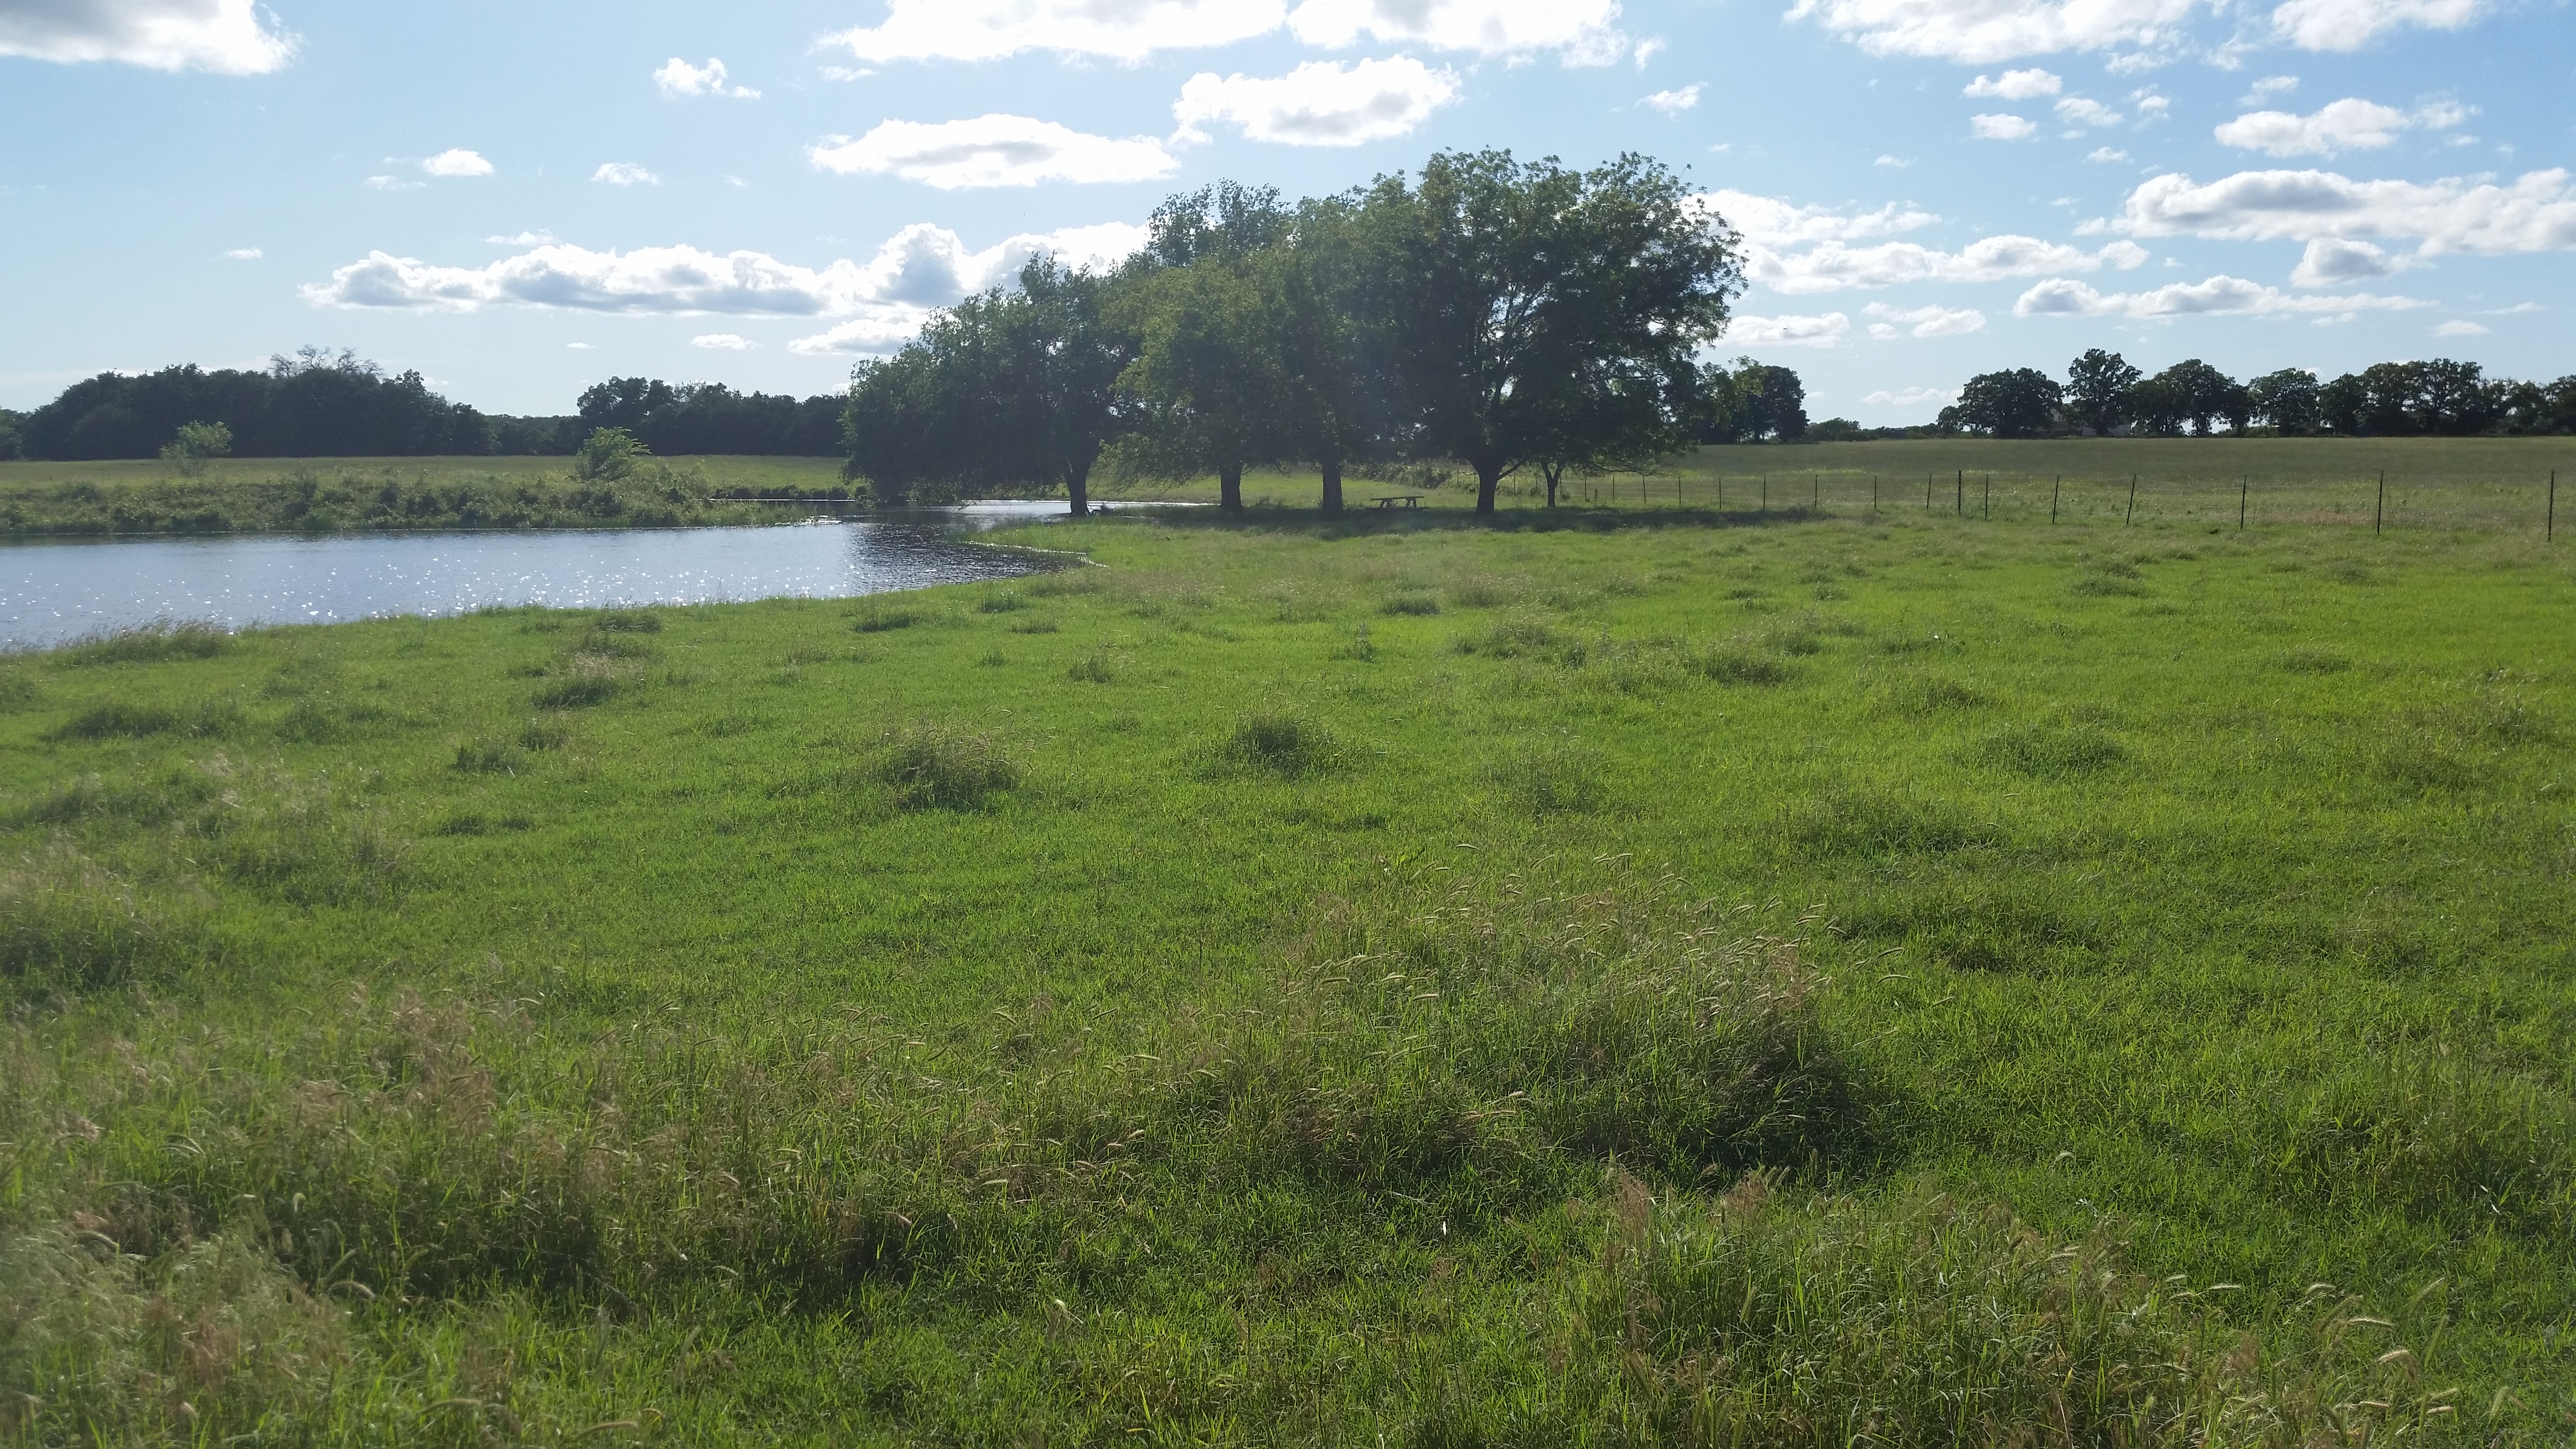 Looking for pasture to lease - PastureScout : PastureScout